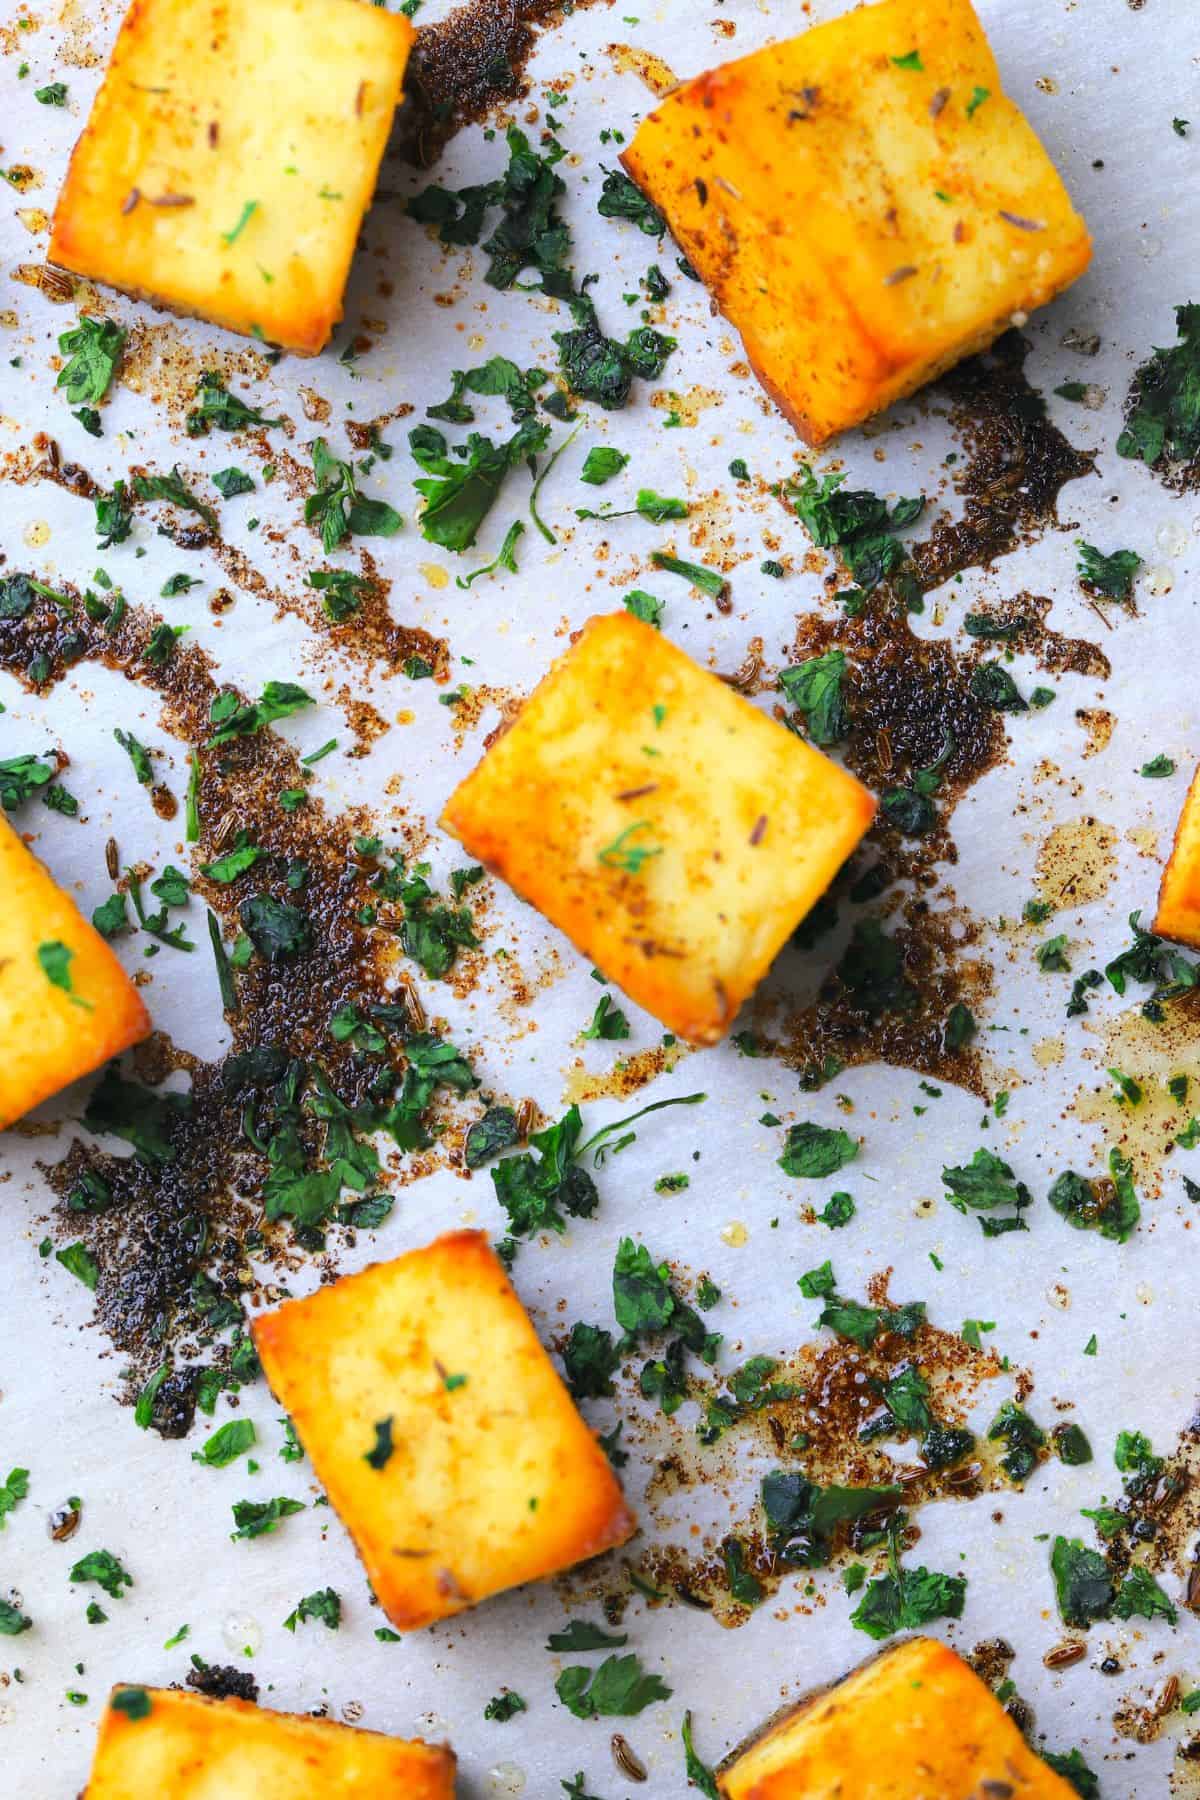 Roasted paneer on a baking sheet sprinkled with chopped cilantro.